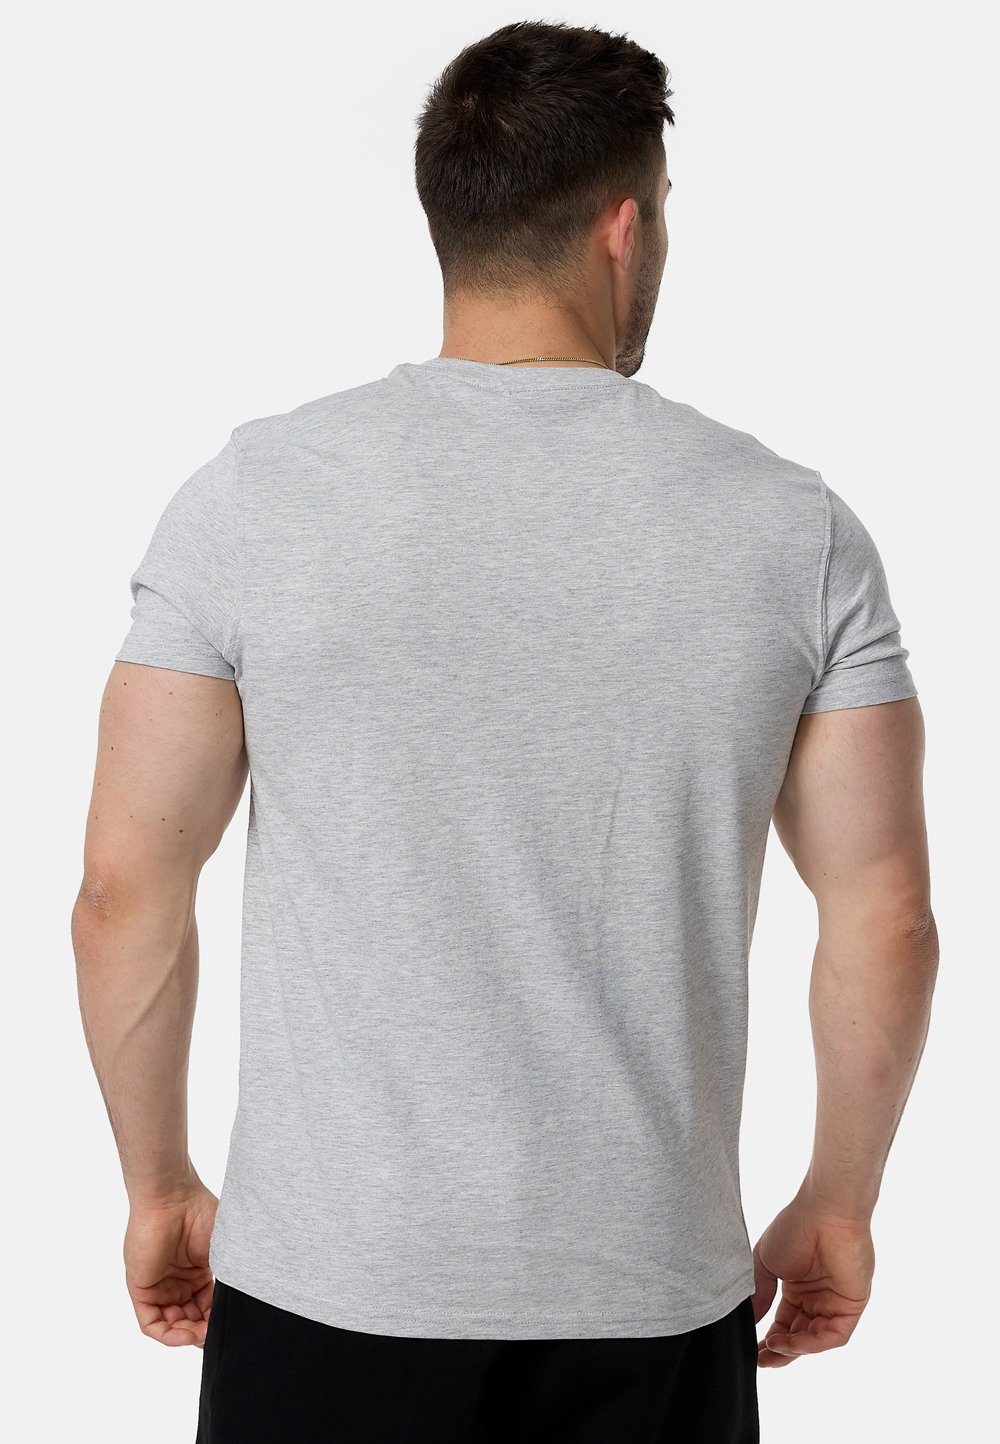 Marl BASIC ACTIVE TAPOUT T-Shirt Grey/Black TEE